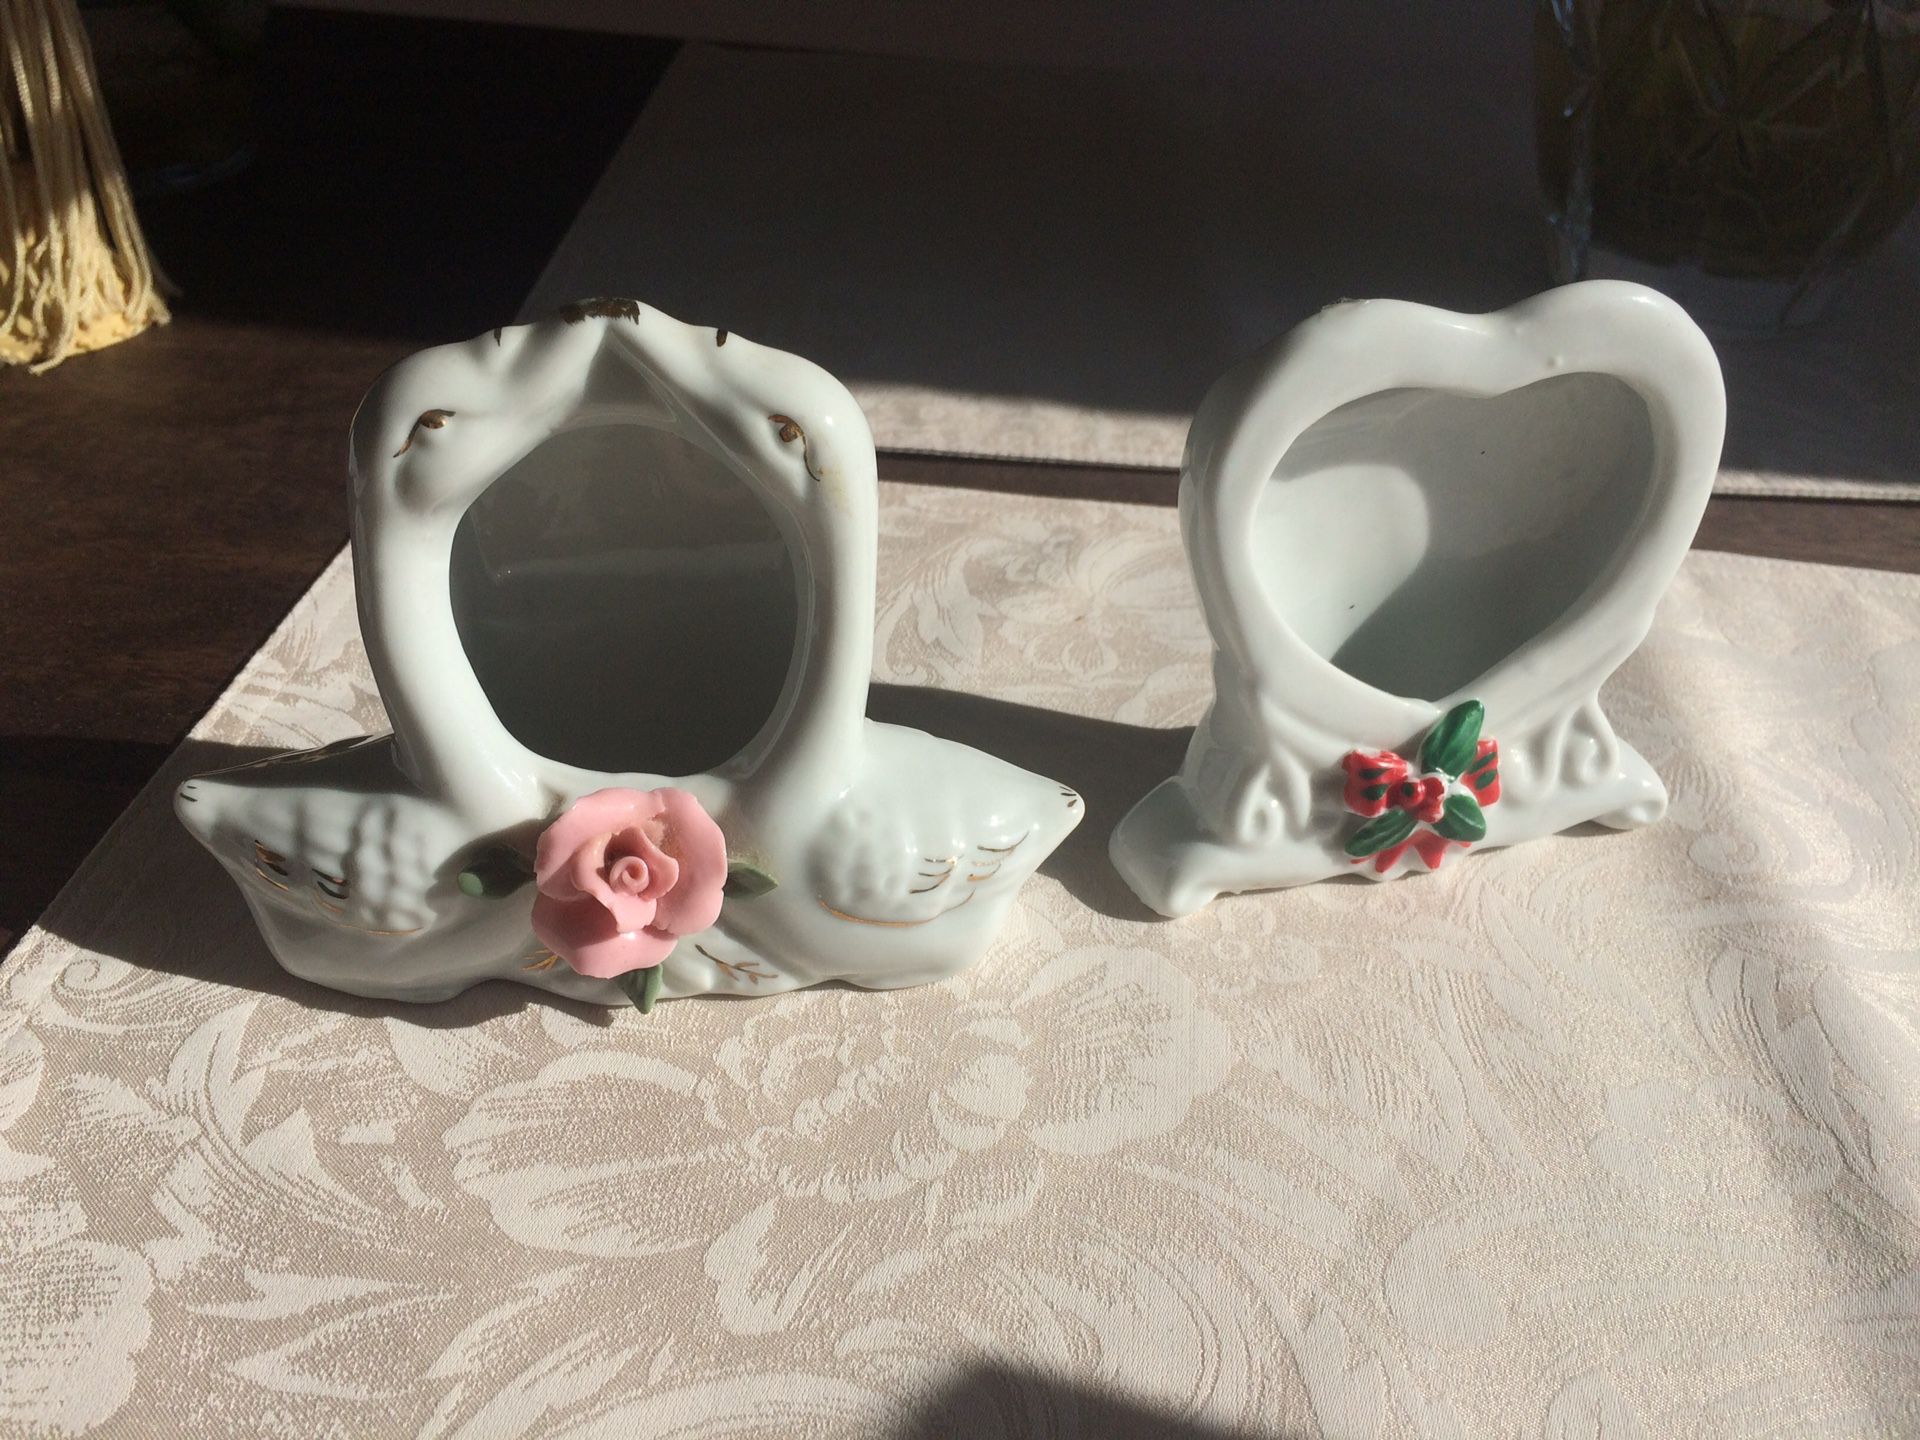 Cute heart shaped picture frames